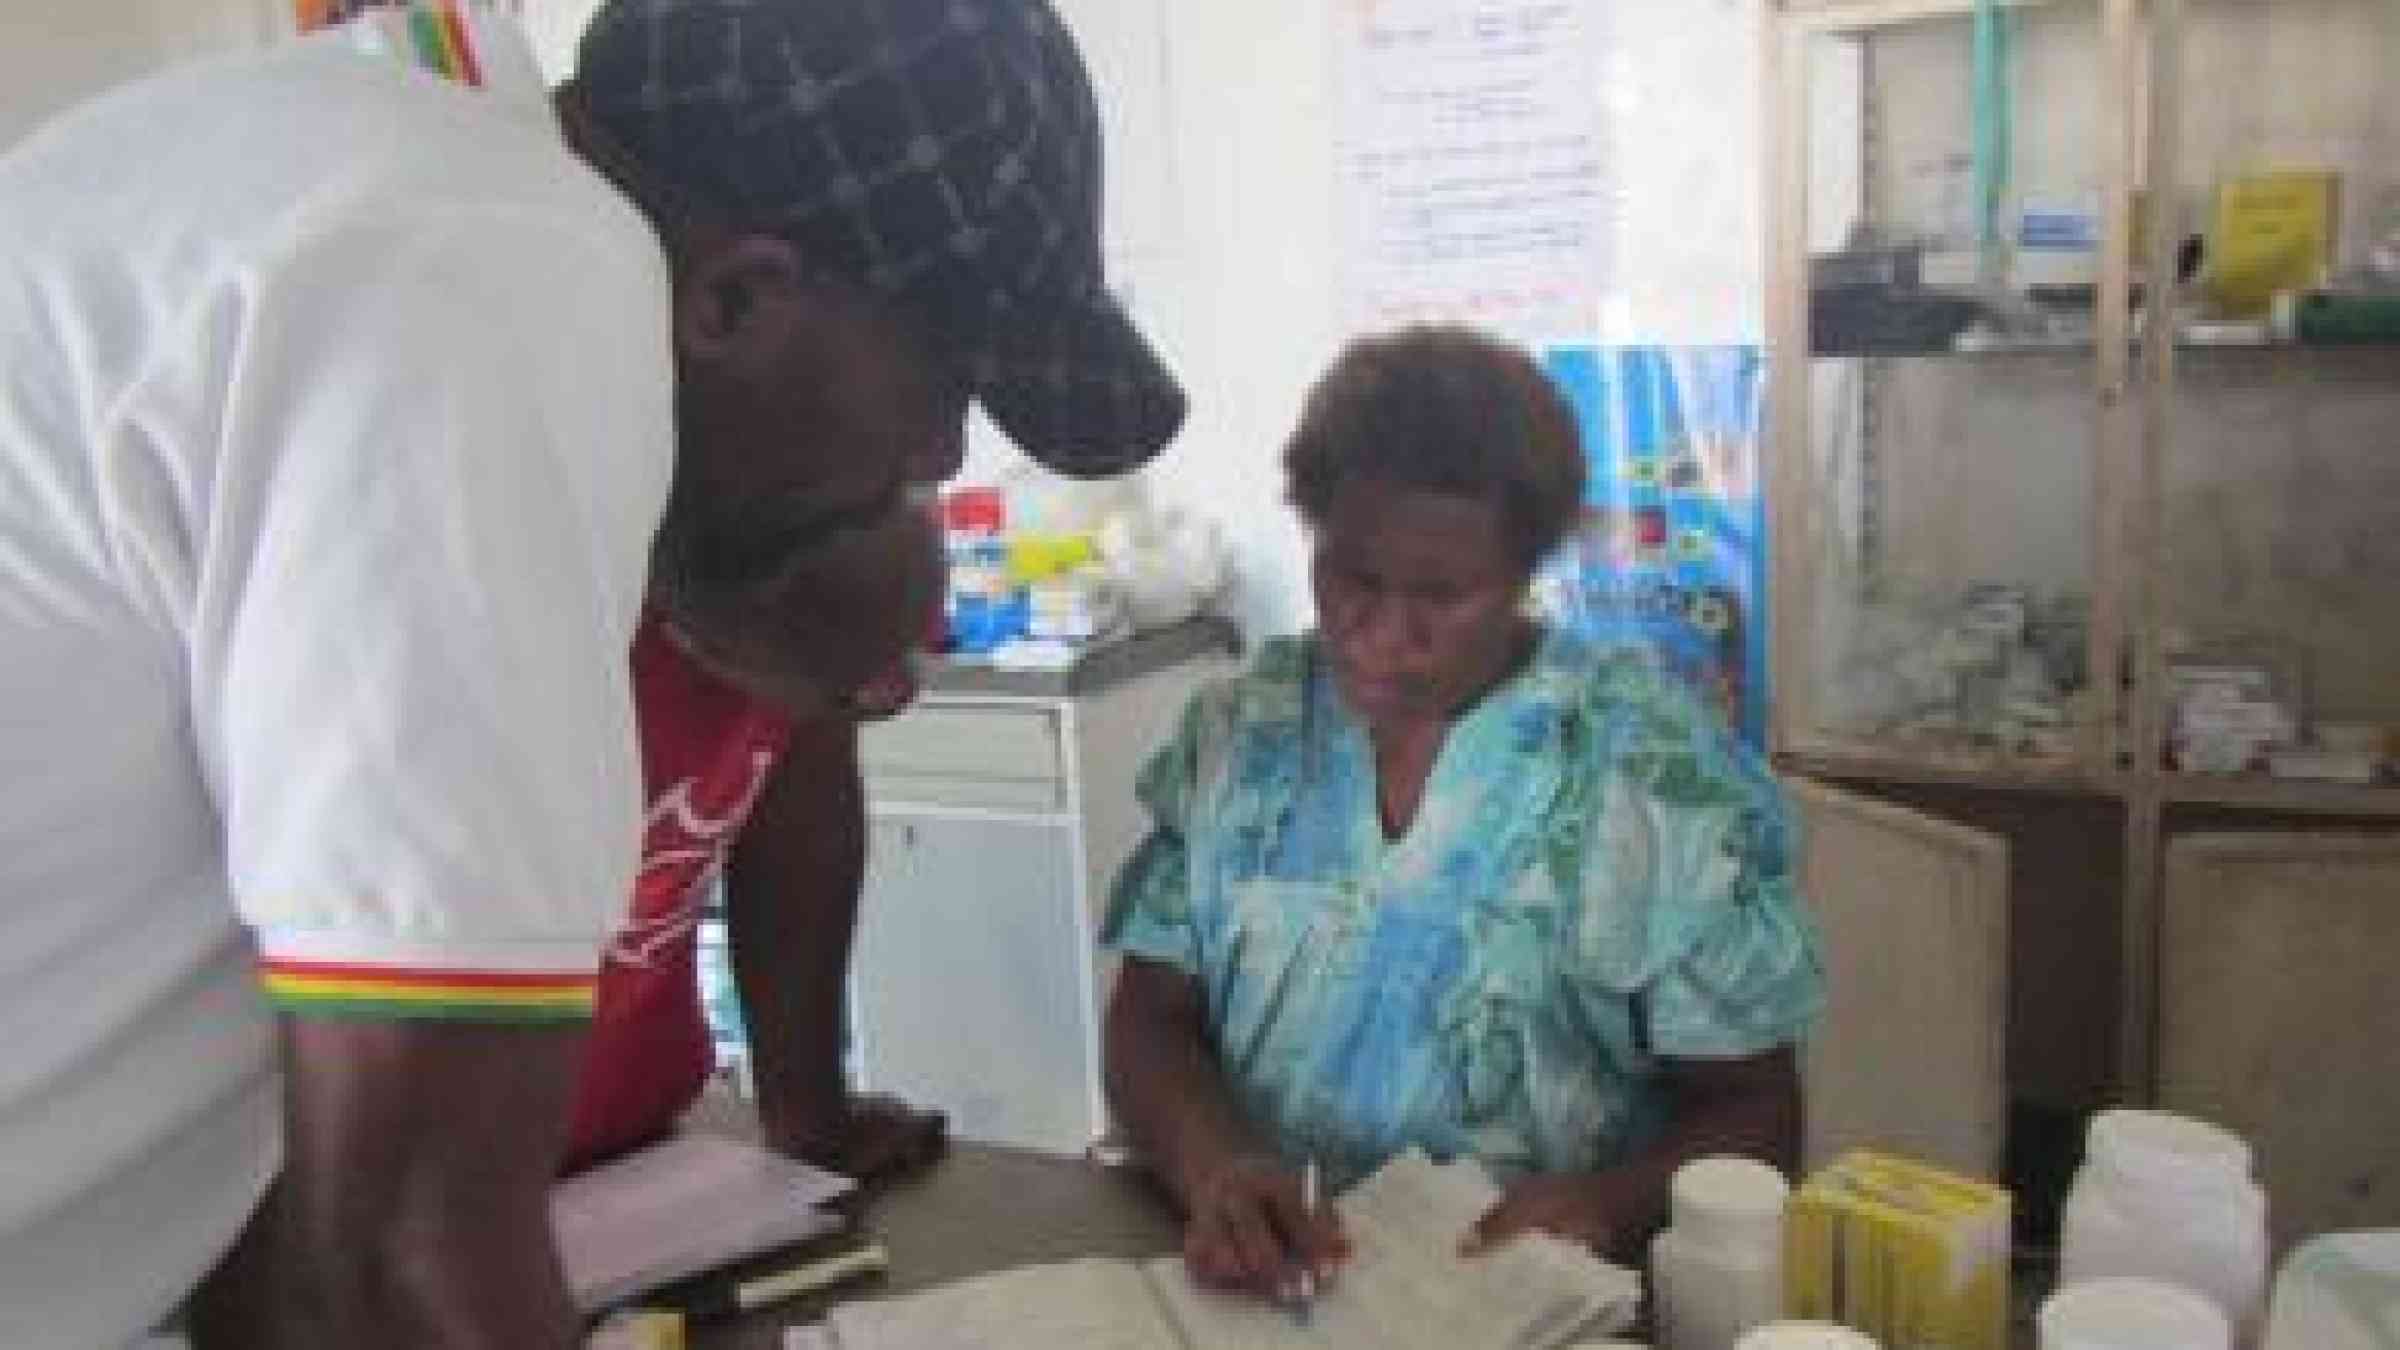 Health clinic staff in Tanna check health surveillance records, as Vanuatu rebuilds after tropical cyclone Pam. Photo by Paul White/Secretariat of the Pacific Community